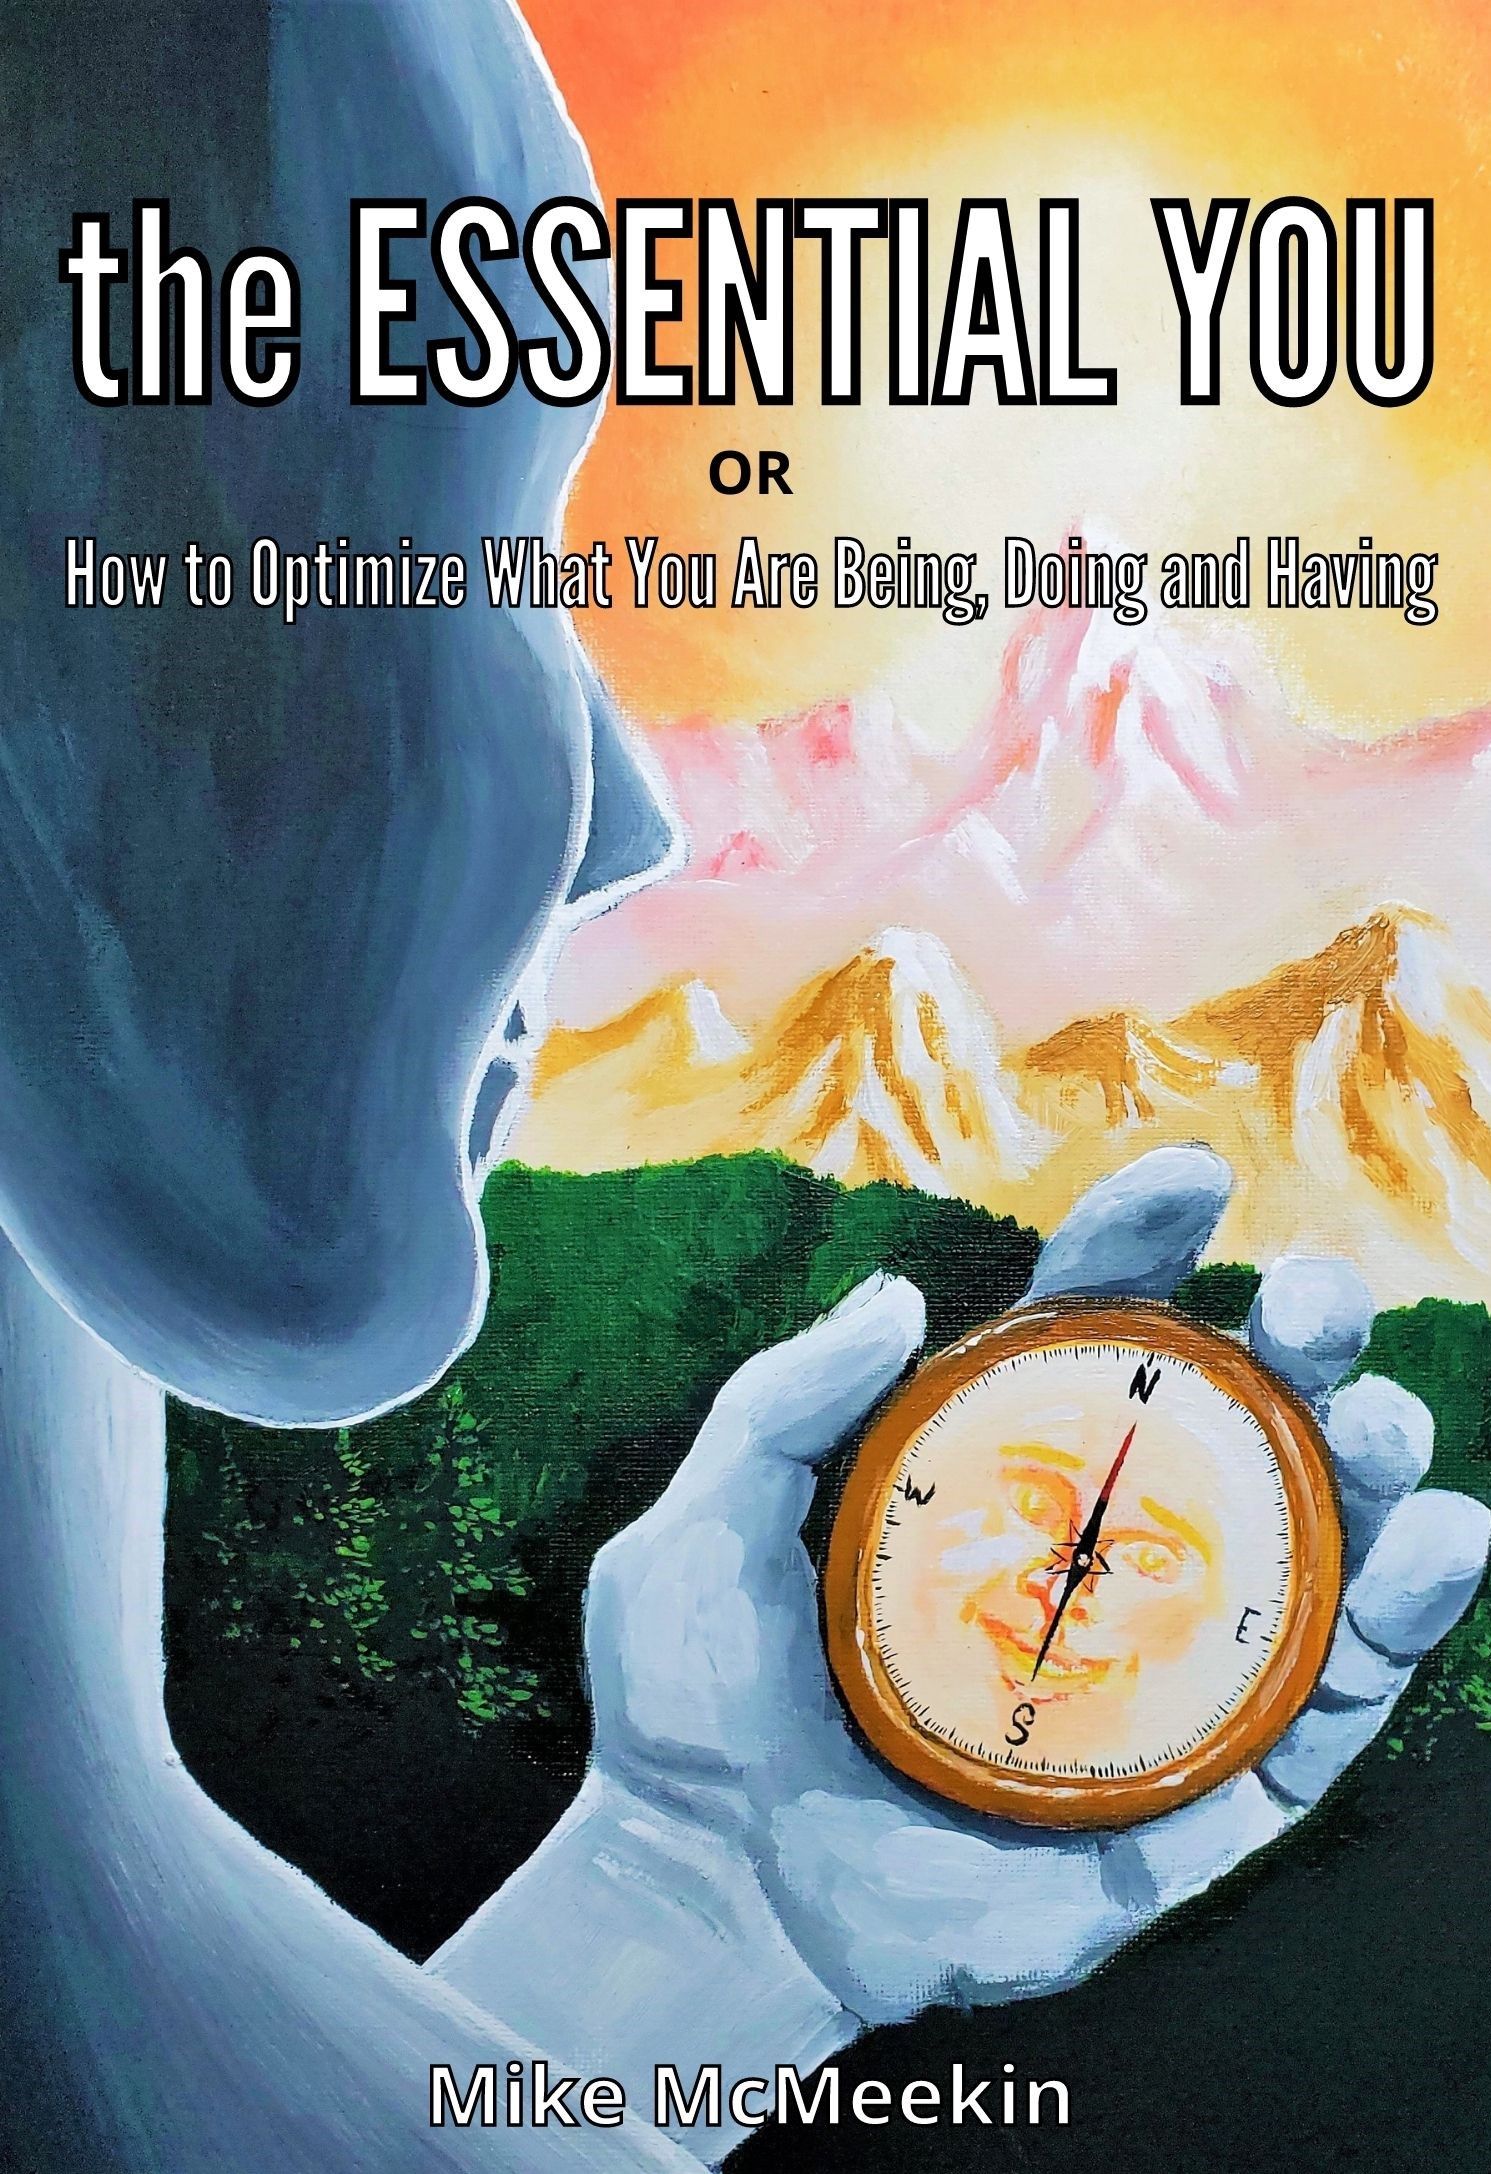 The essential you program - Author: Mike McMeekin - Life Reclamation